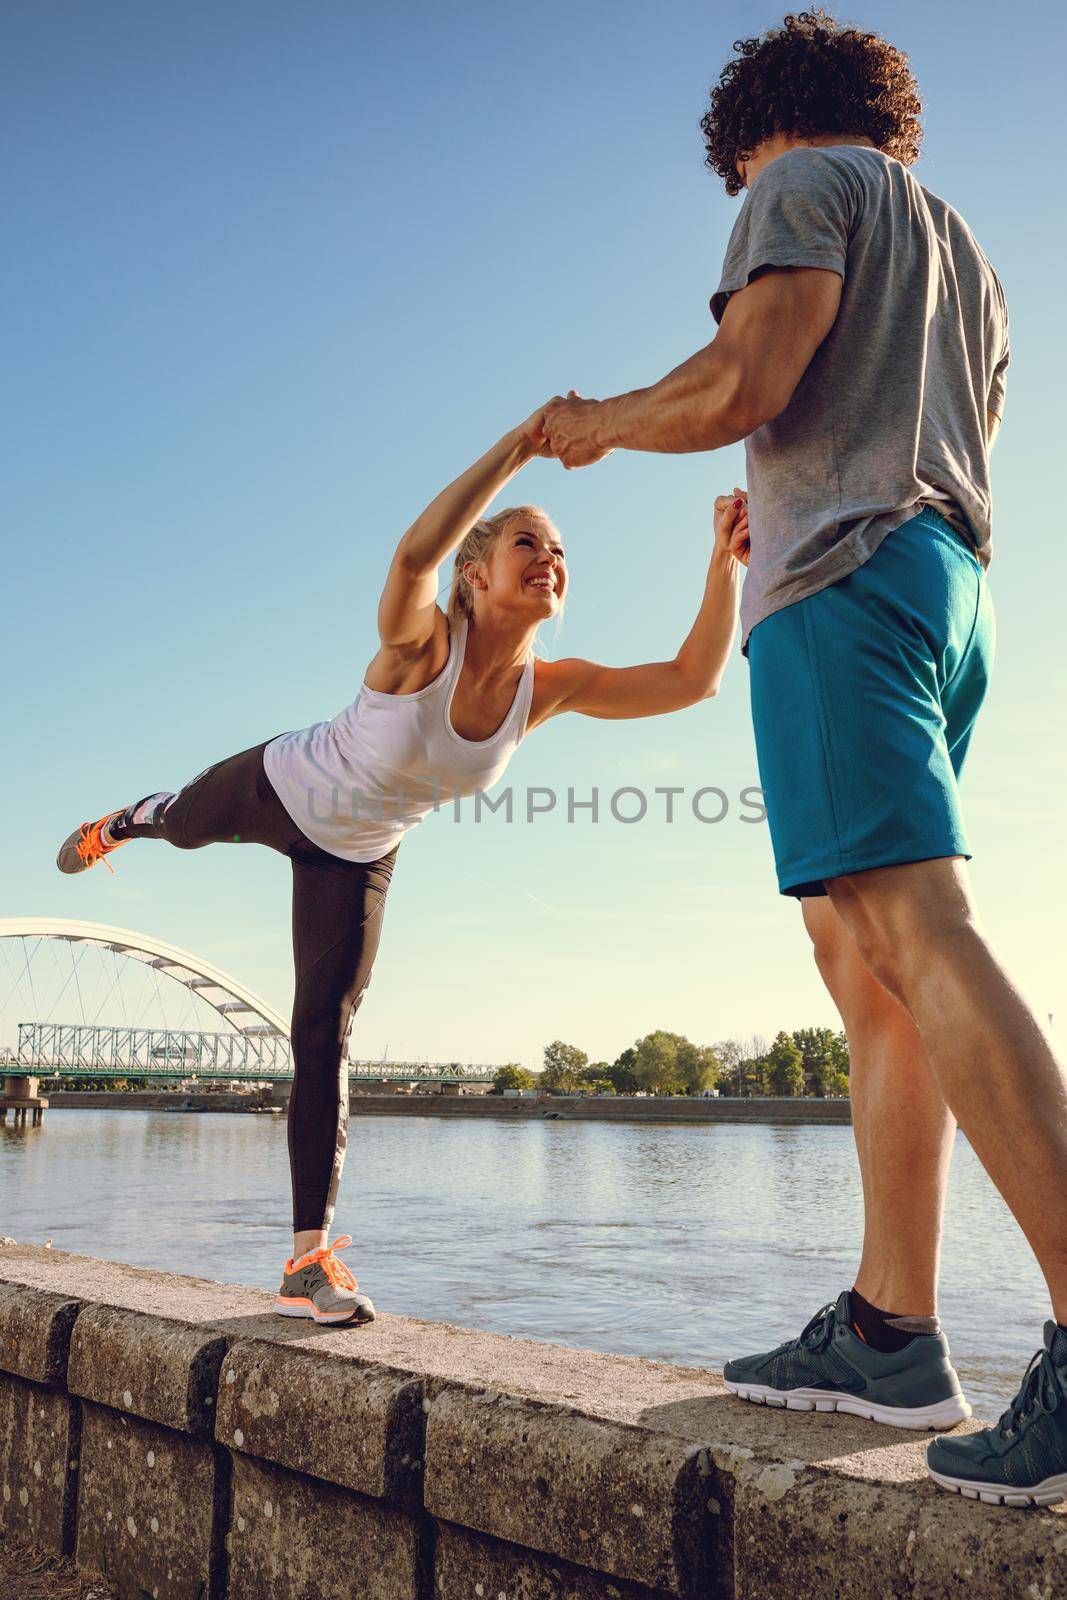 Young happy couple training outdoors by the river, stretching together on the wall at sunset.